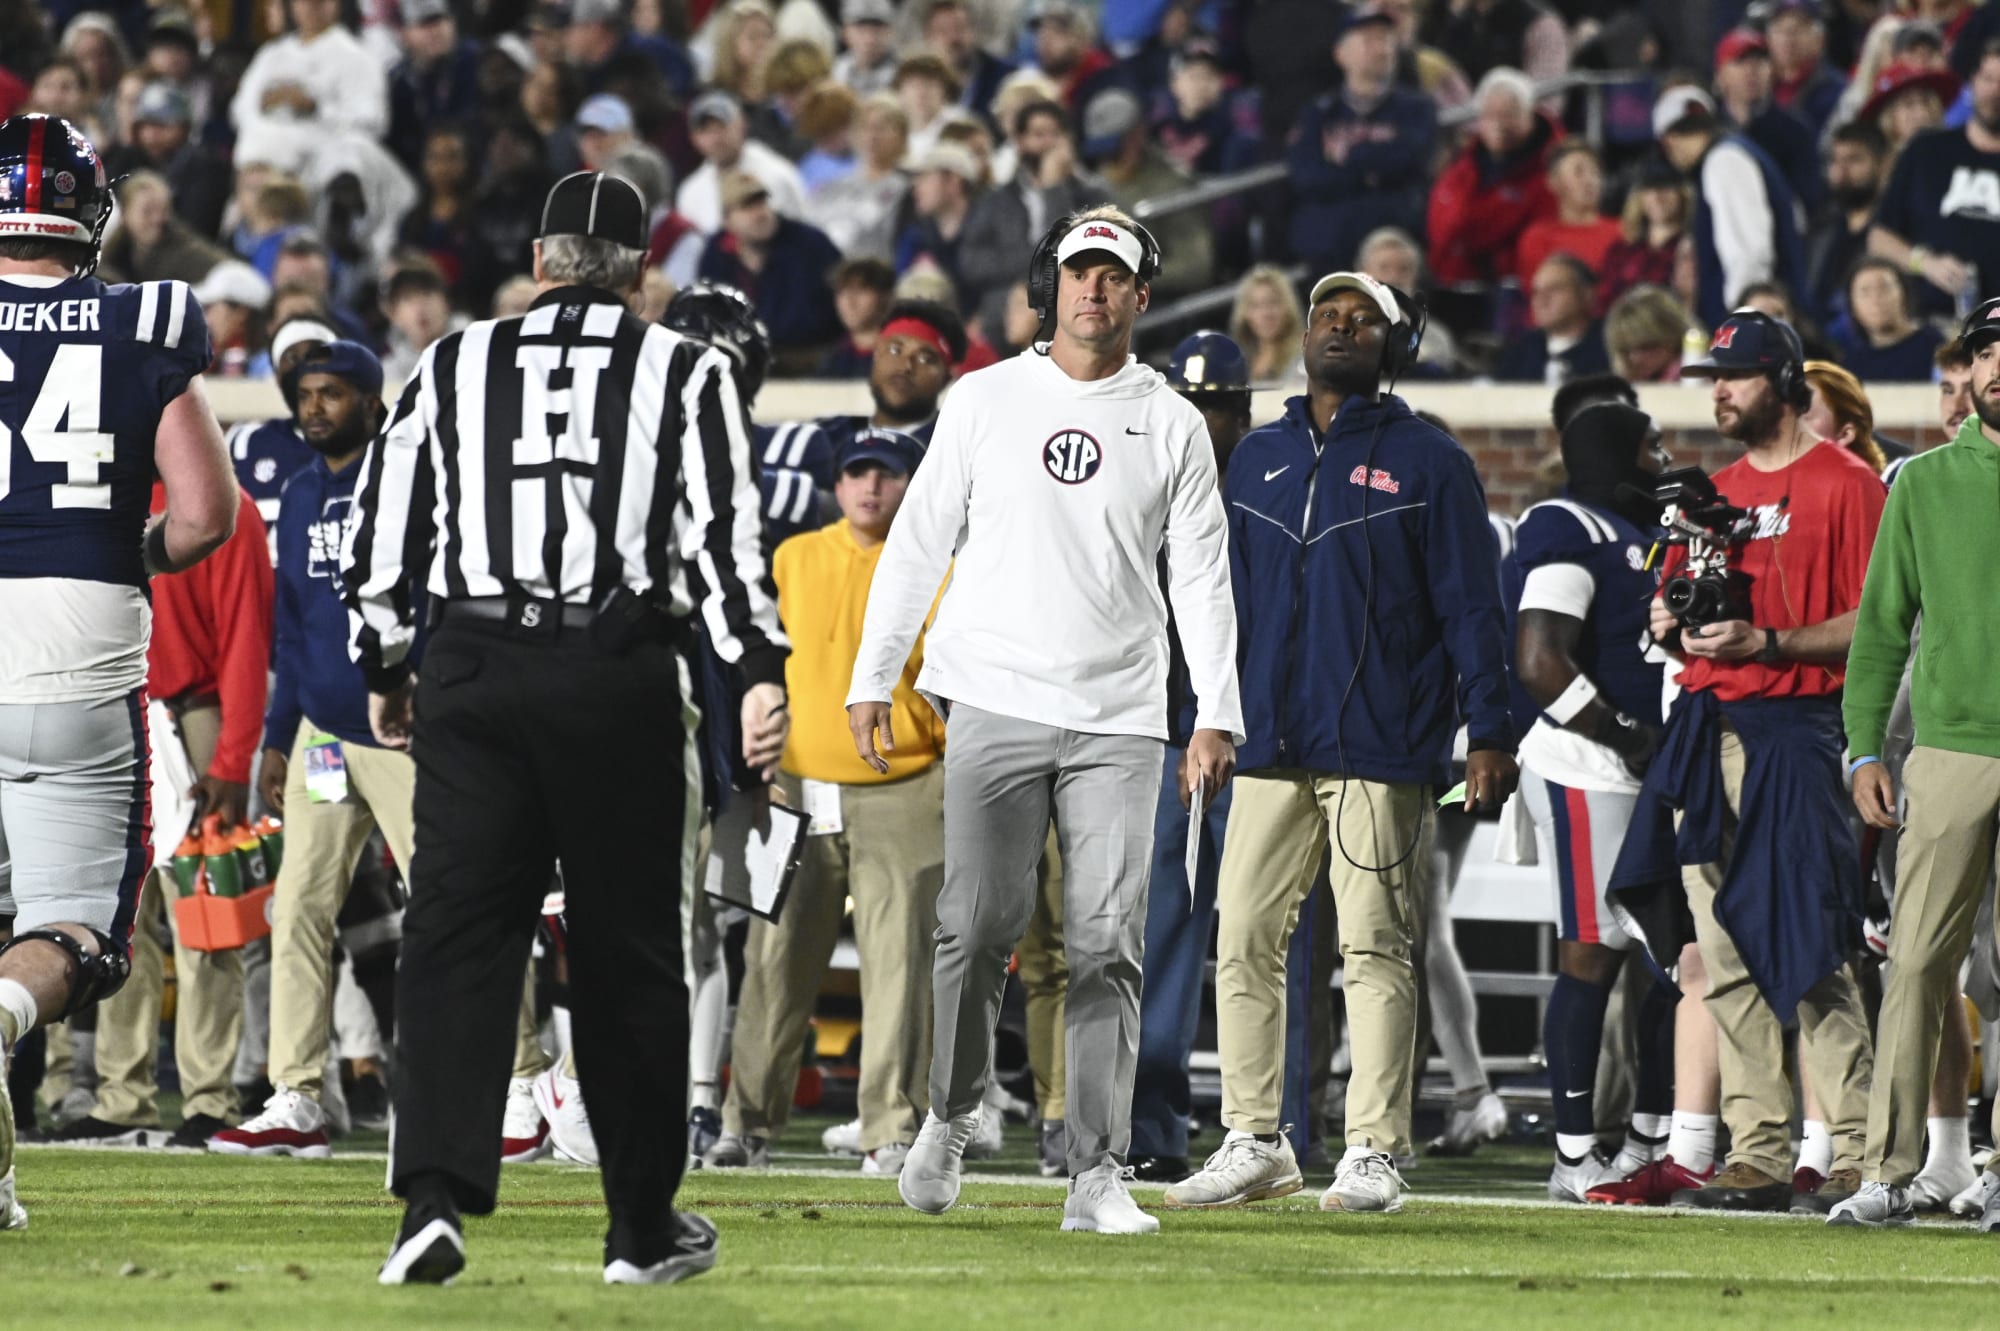 Egg Bowl descends into complete fan chaos Here’s everything that